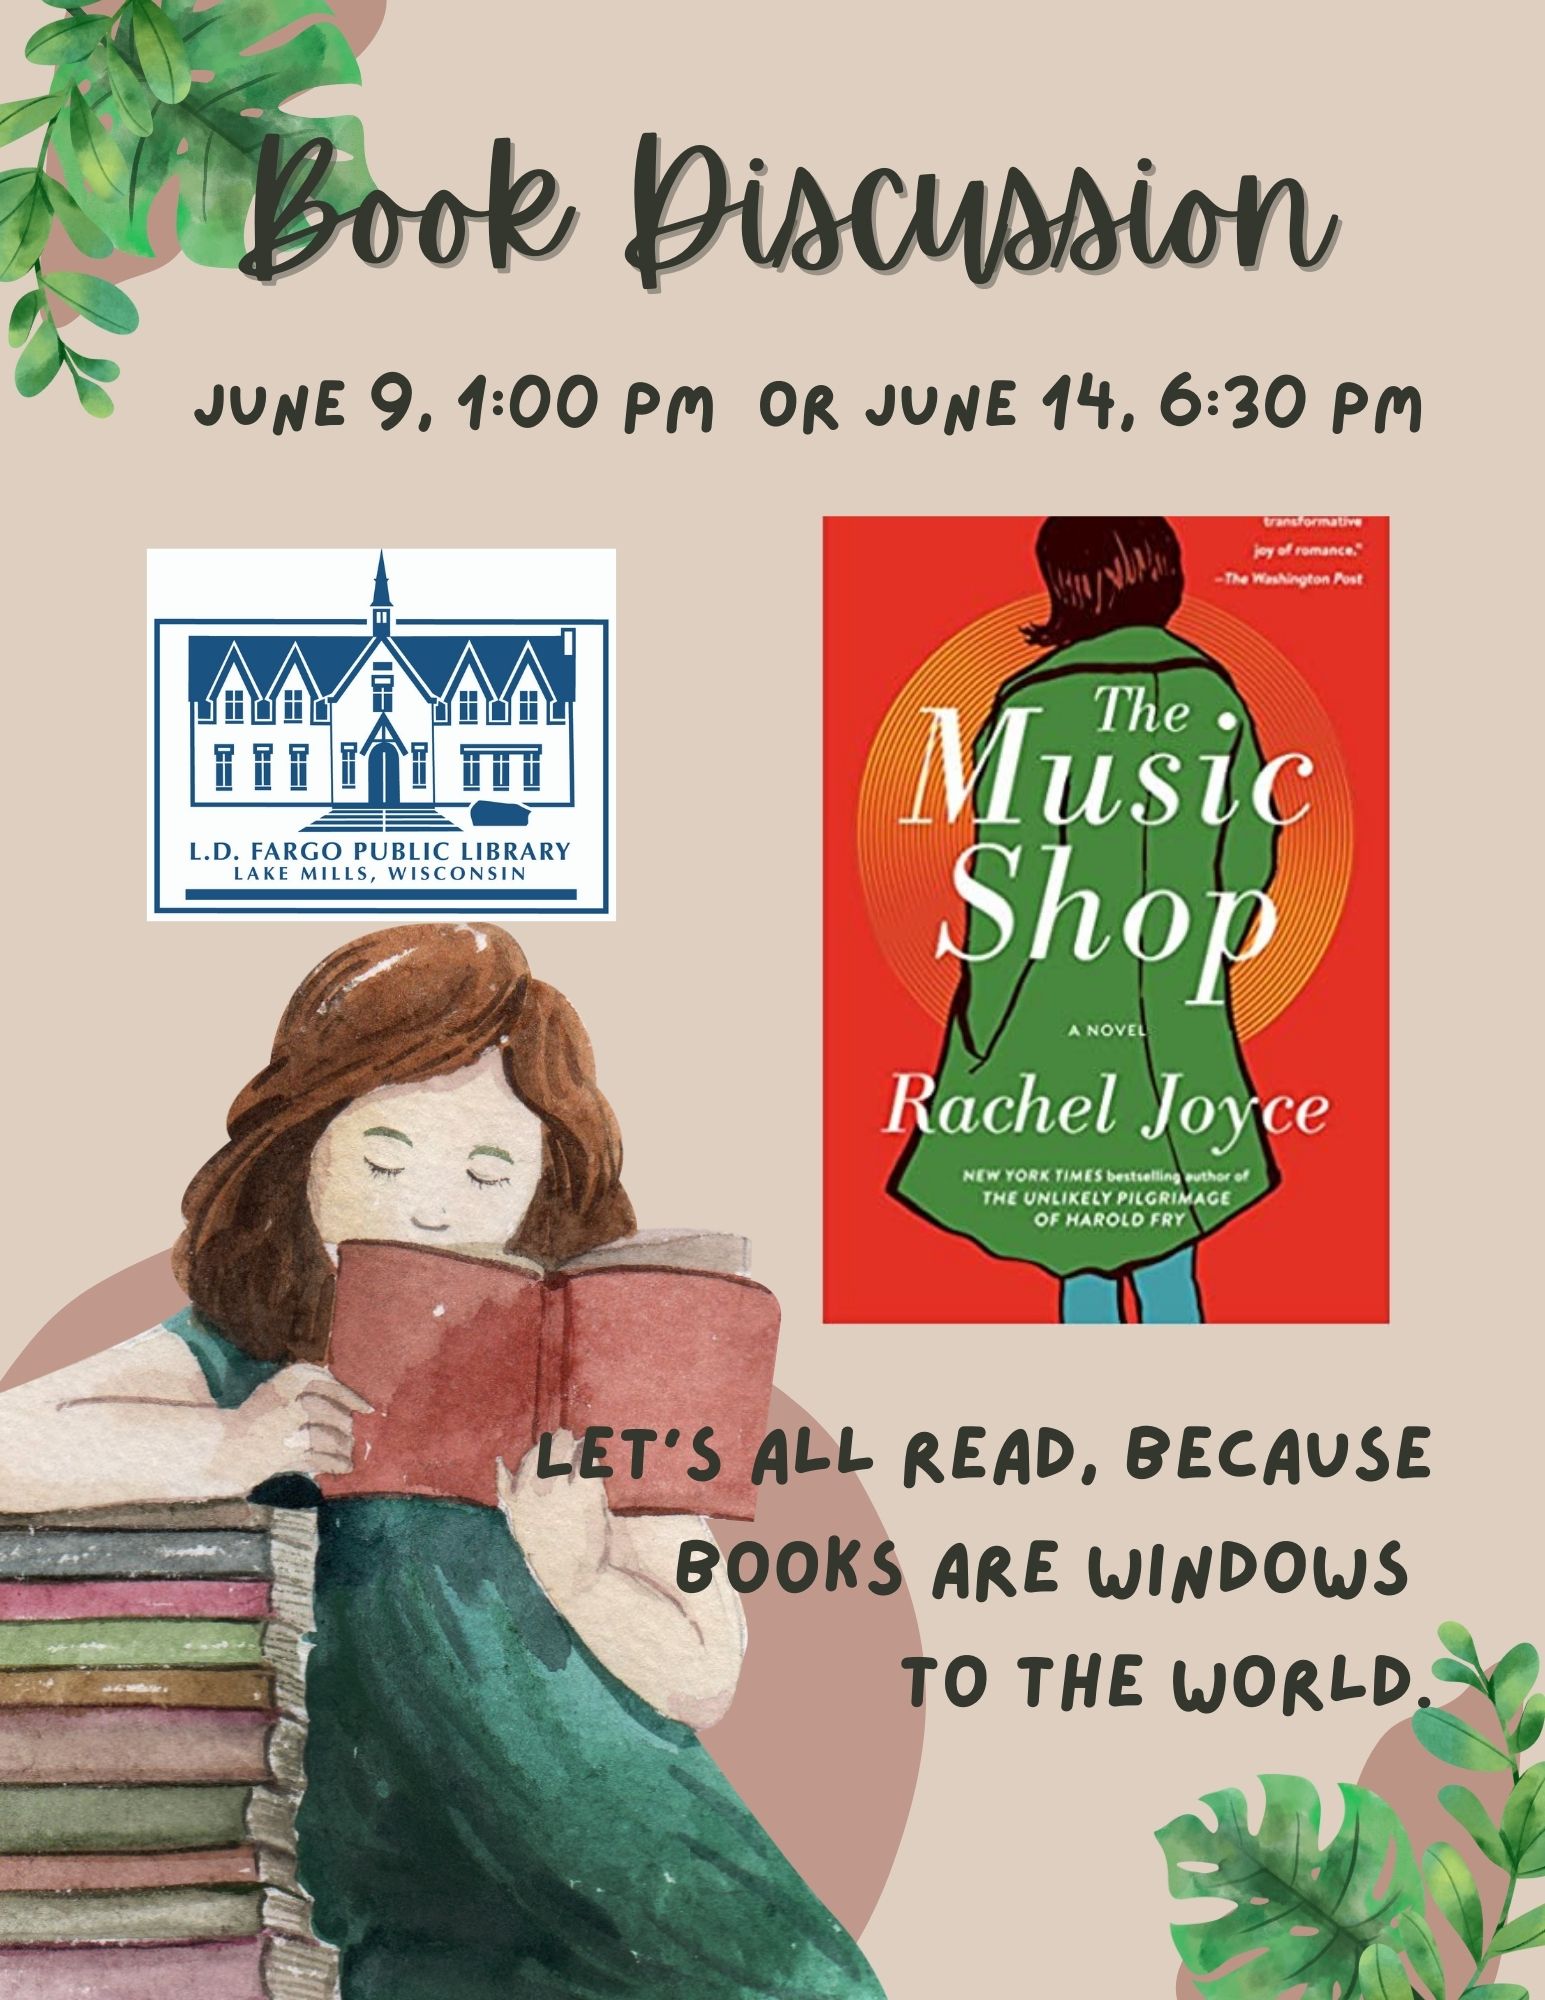 Book Discussion.  June 9, 1:00 pm  or june 14, 6:30 pm. THe Music Shop by Rachel Joyce.